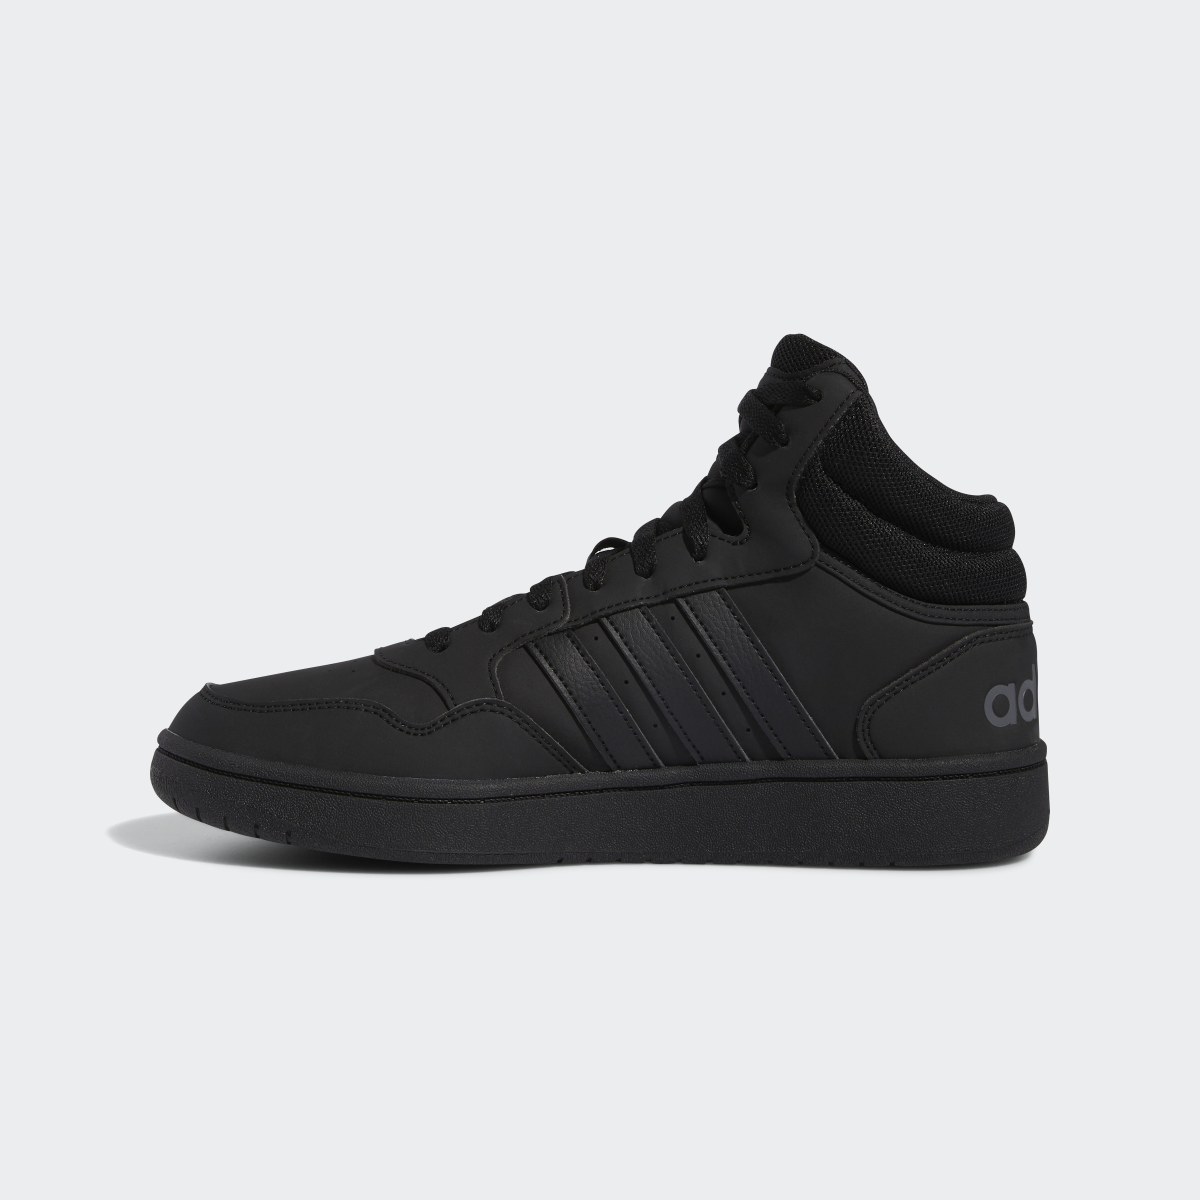 Adidas Chaussure Hoops 3 Mid Lifestyle Basketball Mid Classic. 7